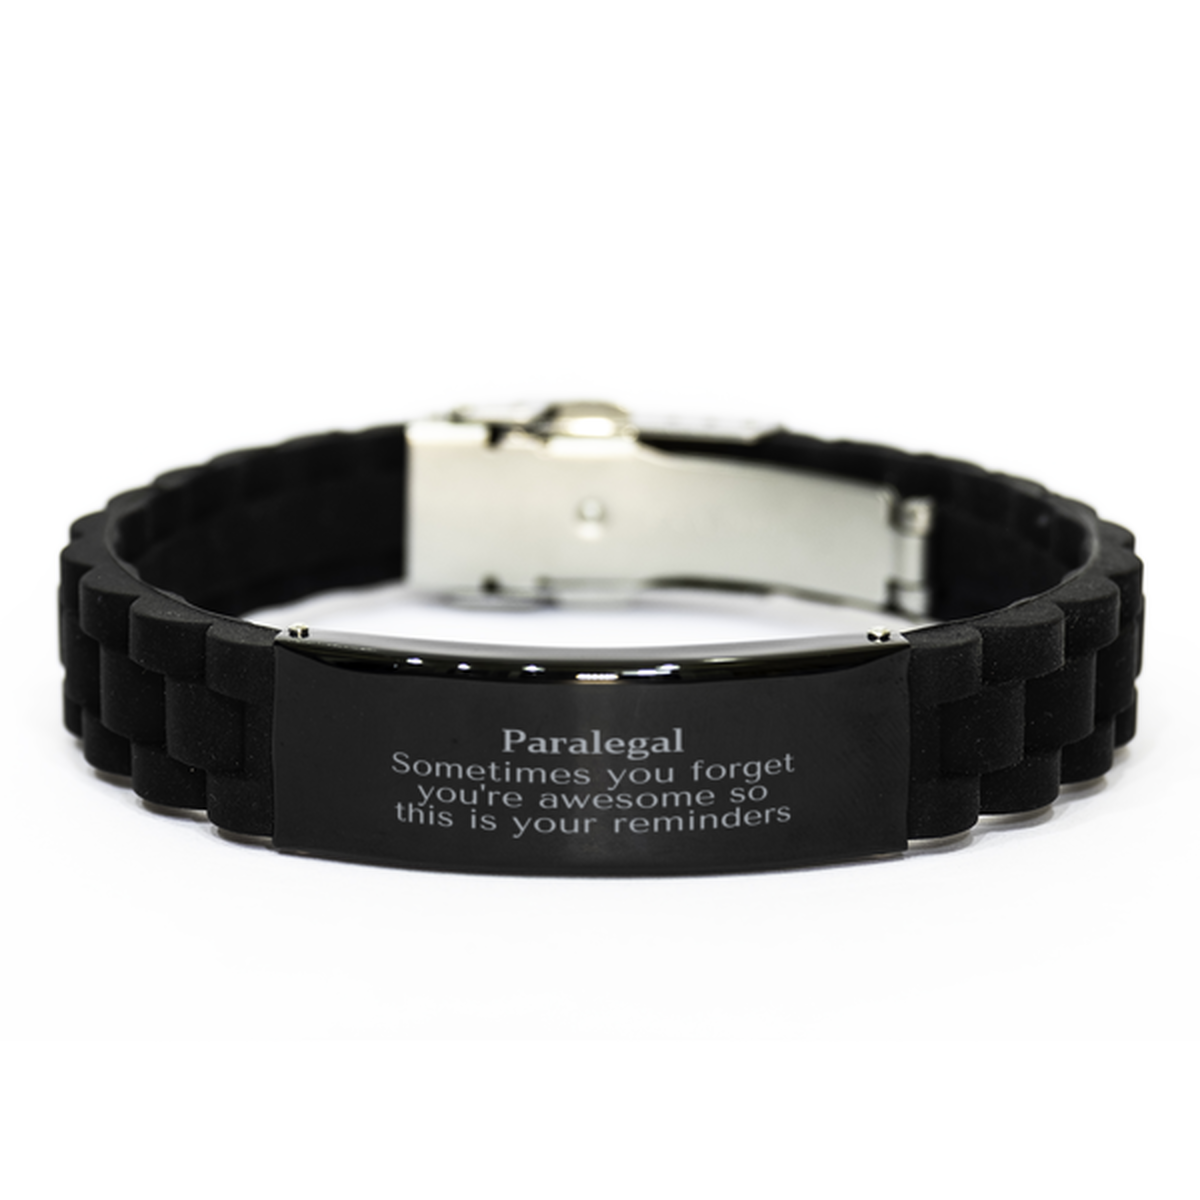 Sentimental Paralegal Black Glidelock Clasp Bracelet, Paralegal Sometimes you forget you're awesome so this is your reminders, Graduation Christmas Birthday Gifts for Paralegal, Men, Women, Coworkers